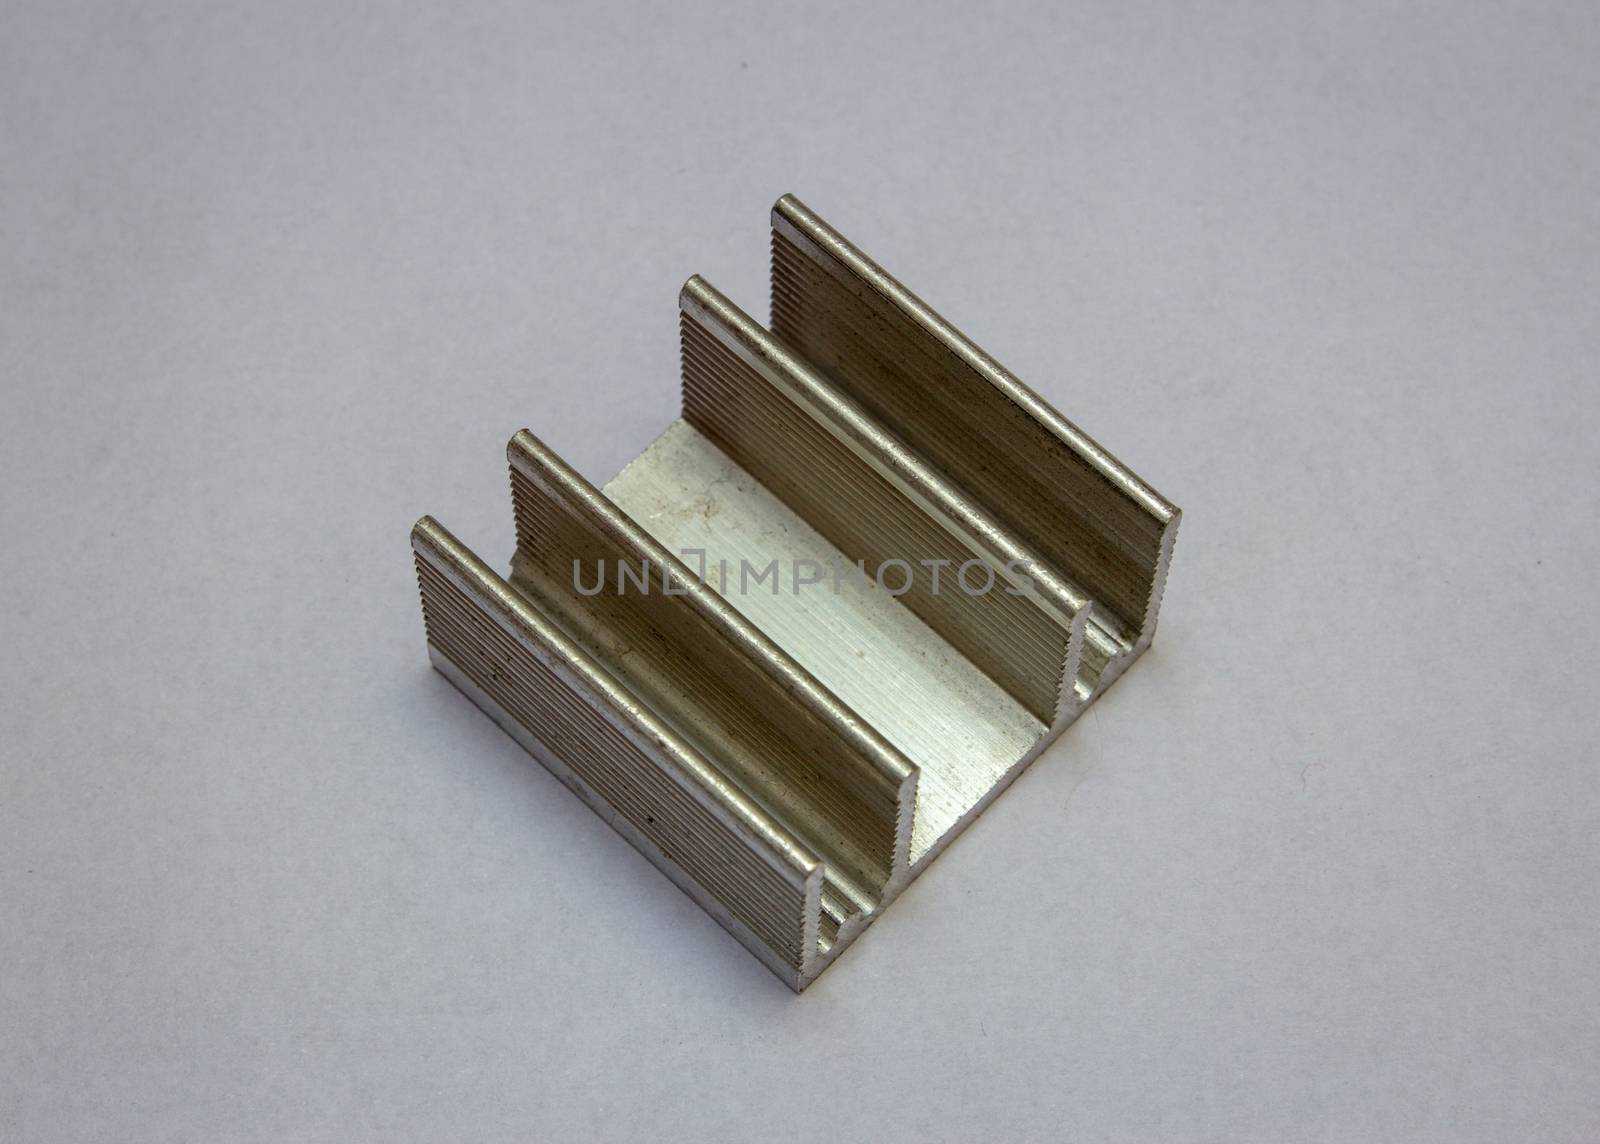 Aluminum heat sink used for cooling down electronic components